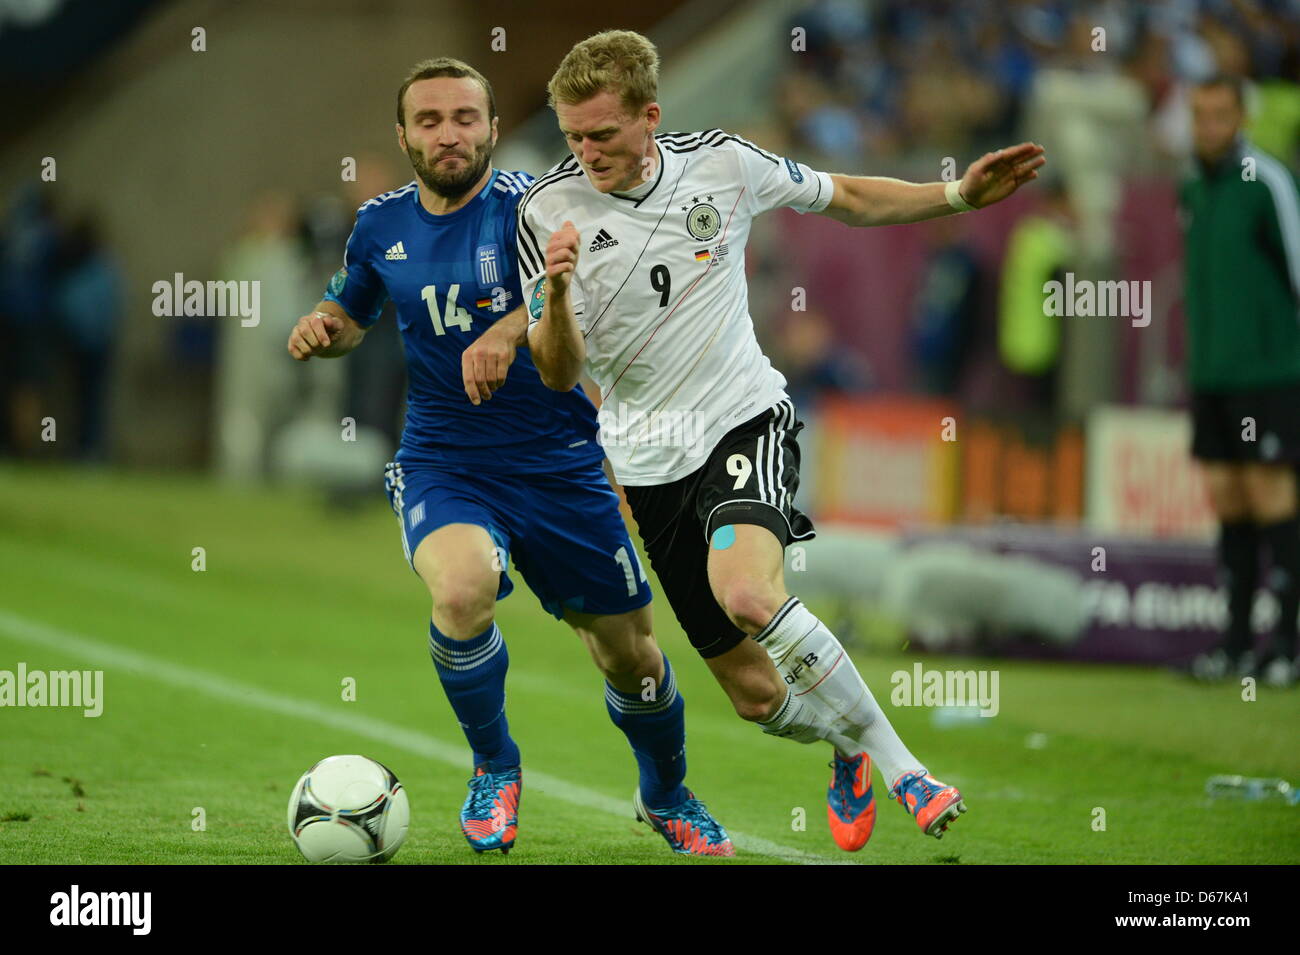 Germany's Andre Schuerrle (R) and Greece's Dimitris Salpingidis vie for the ball during UEFA EURO 2012 quarter-final soccer match Germany vs Greece at Arena Gdansk in Gdansk, Poland, 22 June 2012. Photo: Andreas Gebert dpa (Please refer to chapters 7 and 8 of http://dpaq.de/Ziovh for UEFA Euro 2012 Terms & Conditions)  +++(c) dpa - Bildfunk+++ Stock Photo